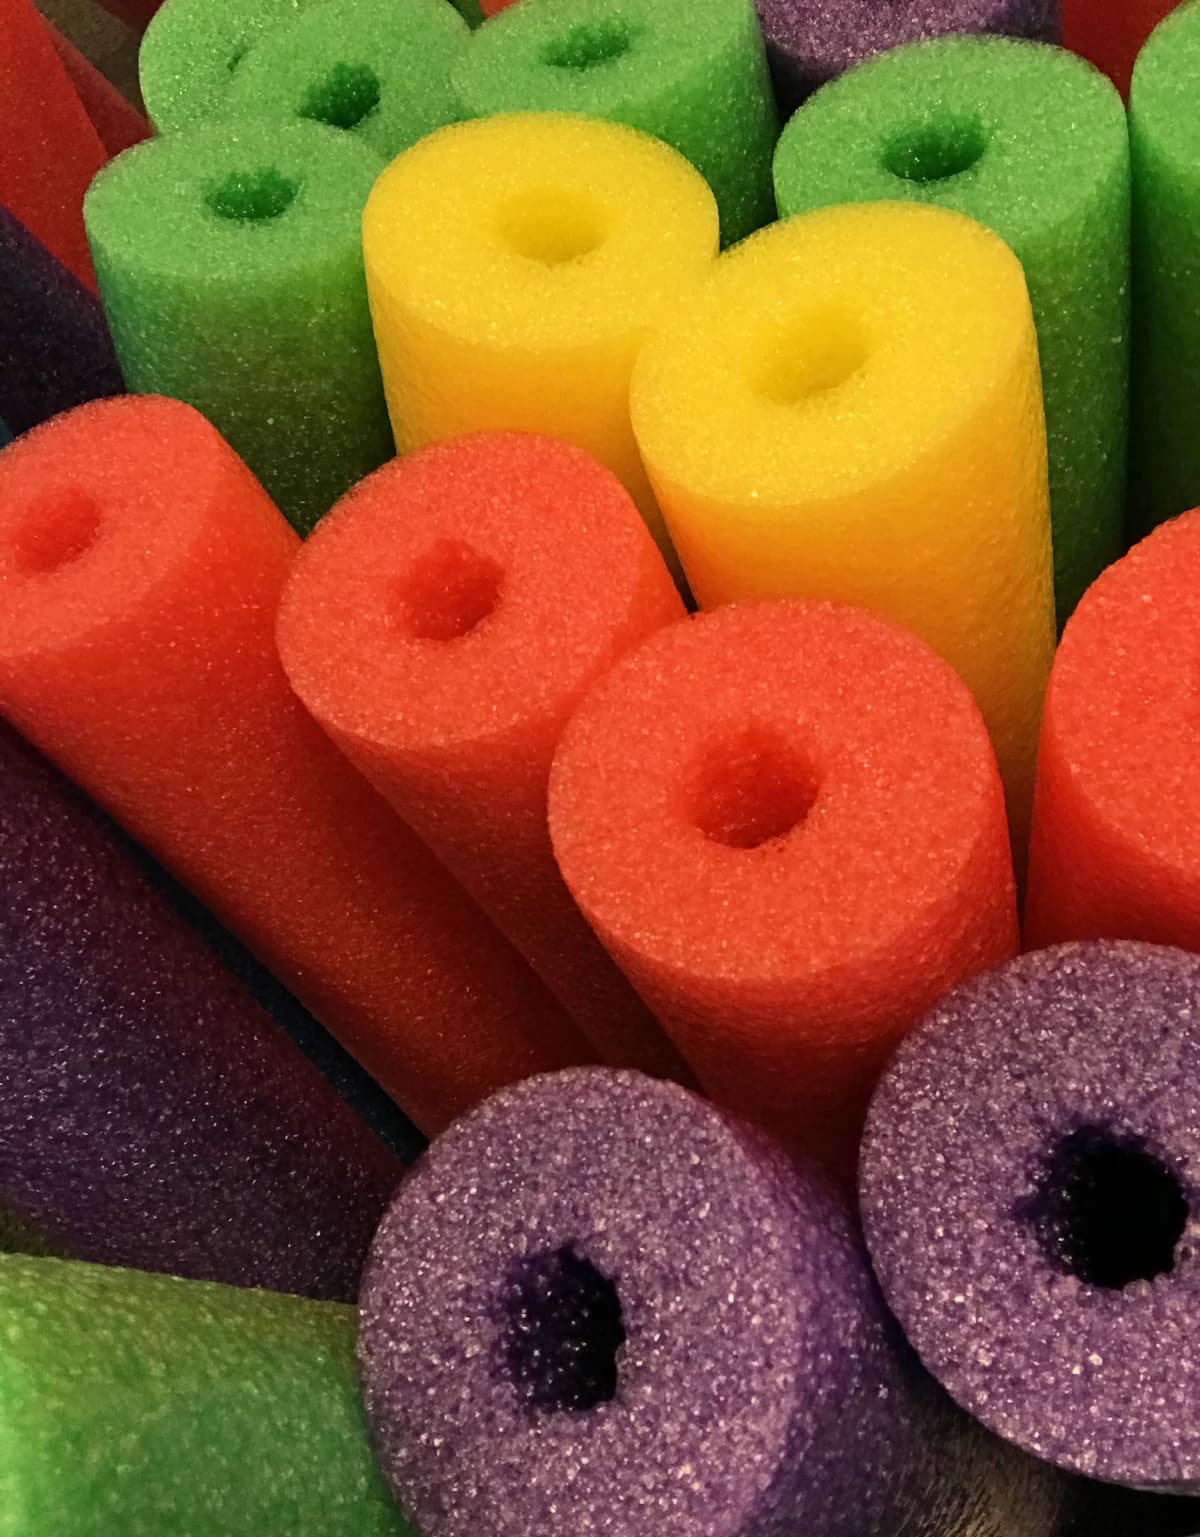 Foam pool noodles in green, yellow, orange, and purple colors